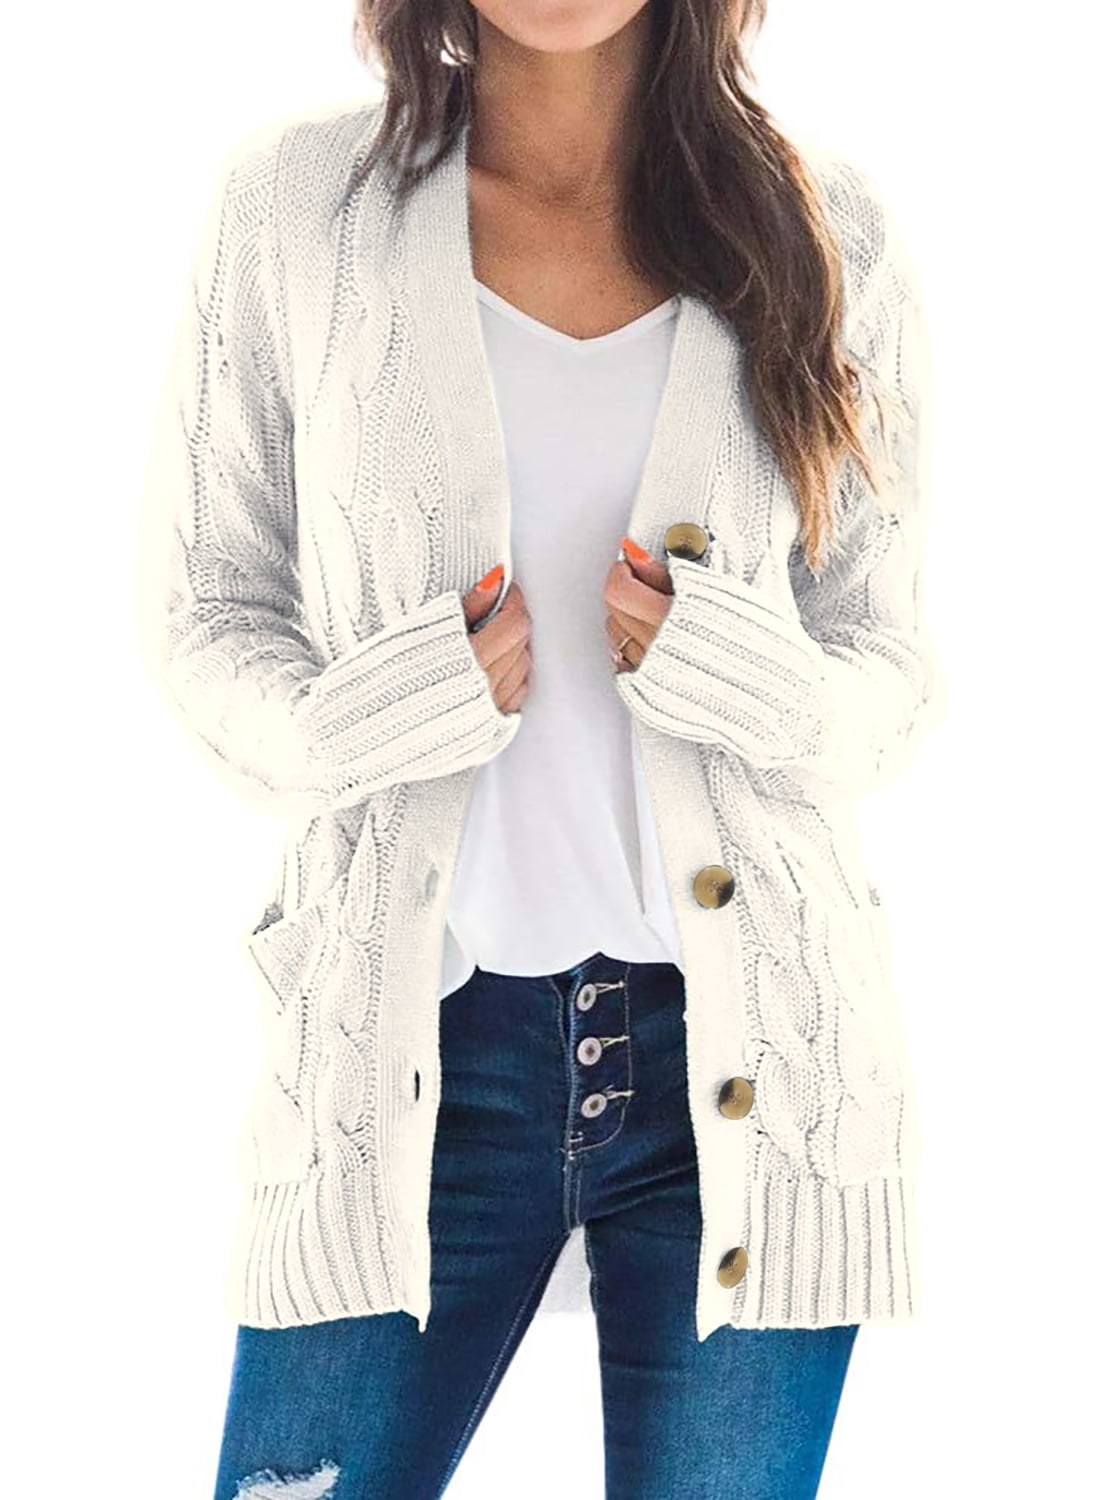 ZESICA Women's Casual Long Sleeve Button Down Open Front Cable Knit Cardigan Sweater Coat